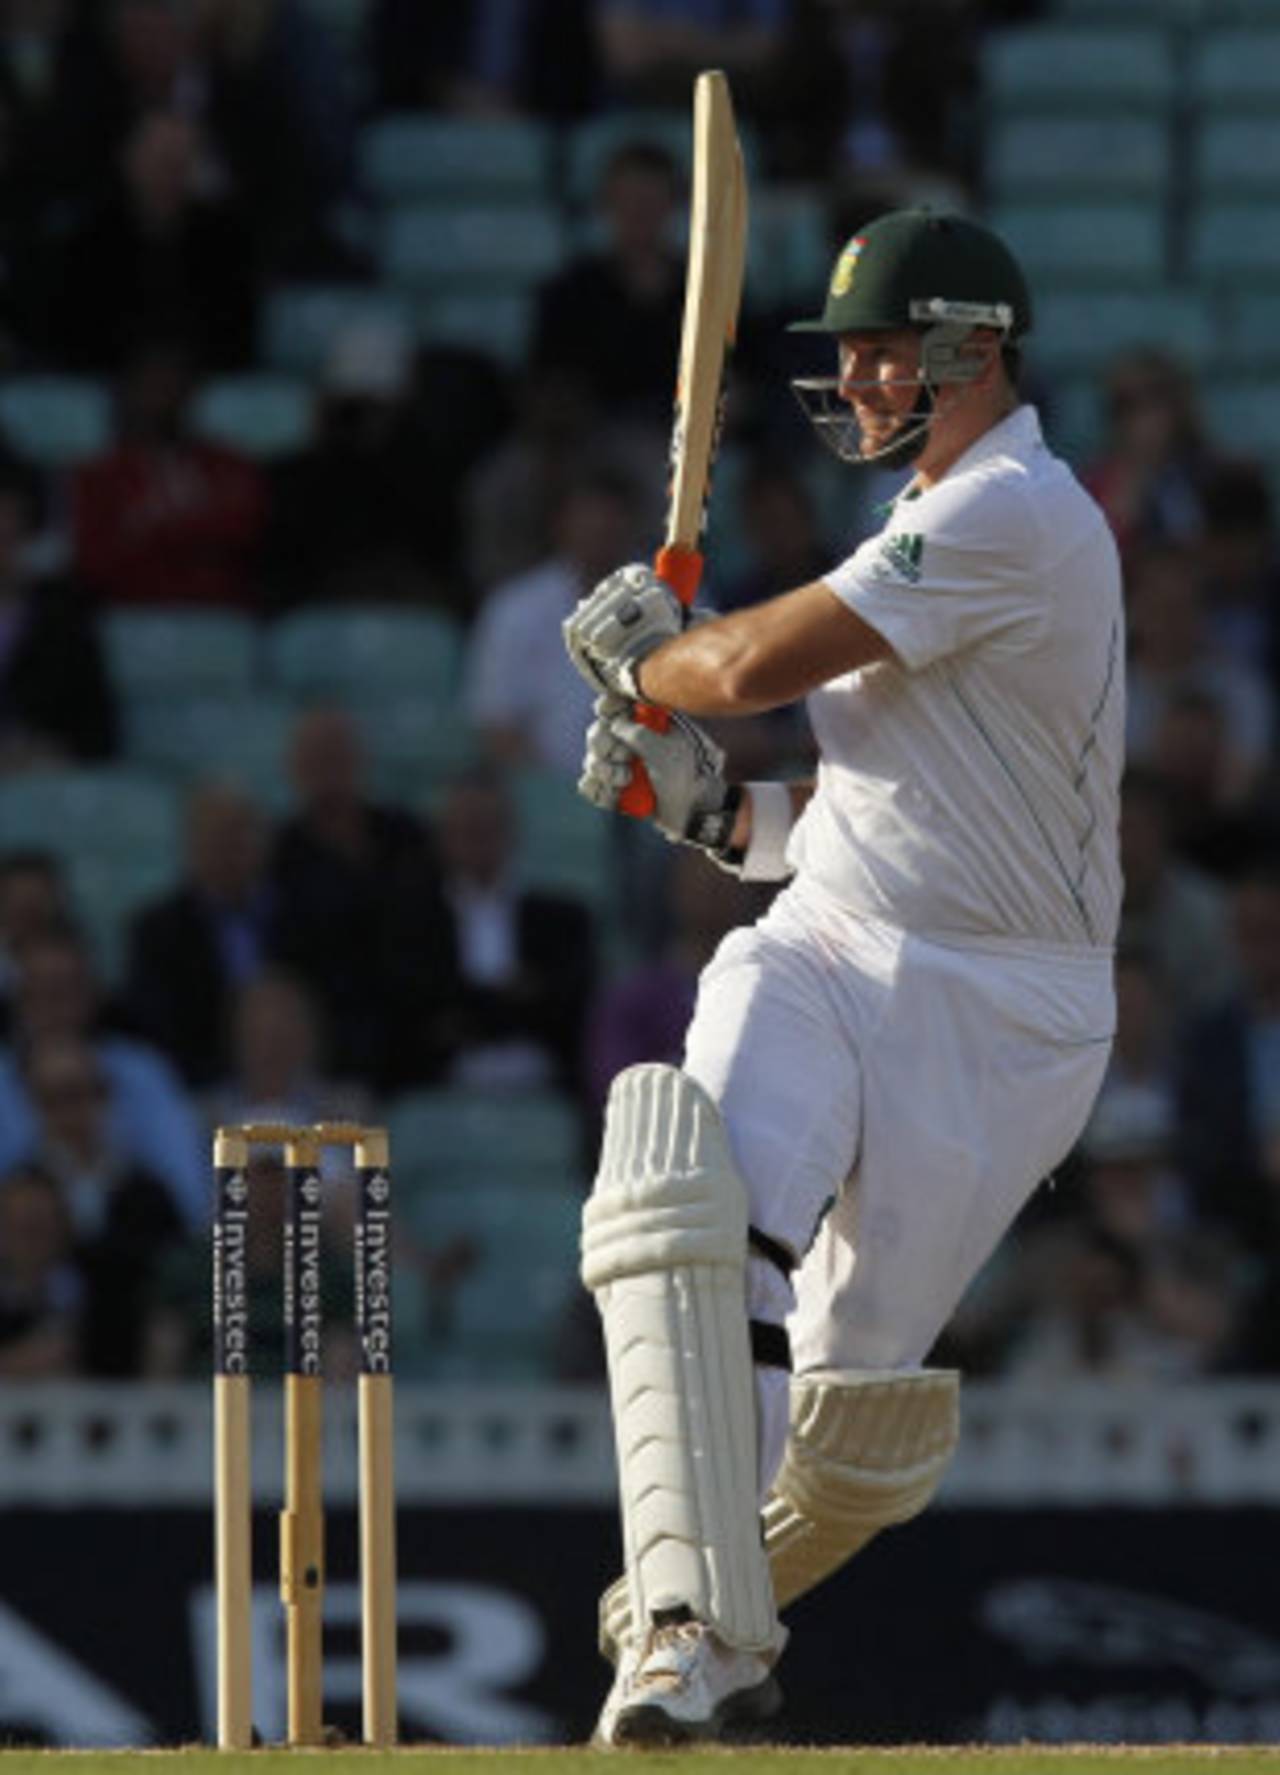 Graeme Smith dug in to remain unbeaten at the close, England v South Africa, 1st Investec Test, The Oval,  2nd day, July 20, 2012